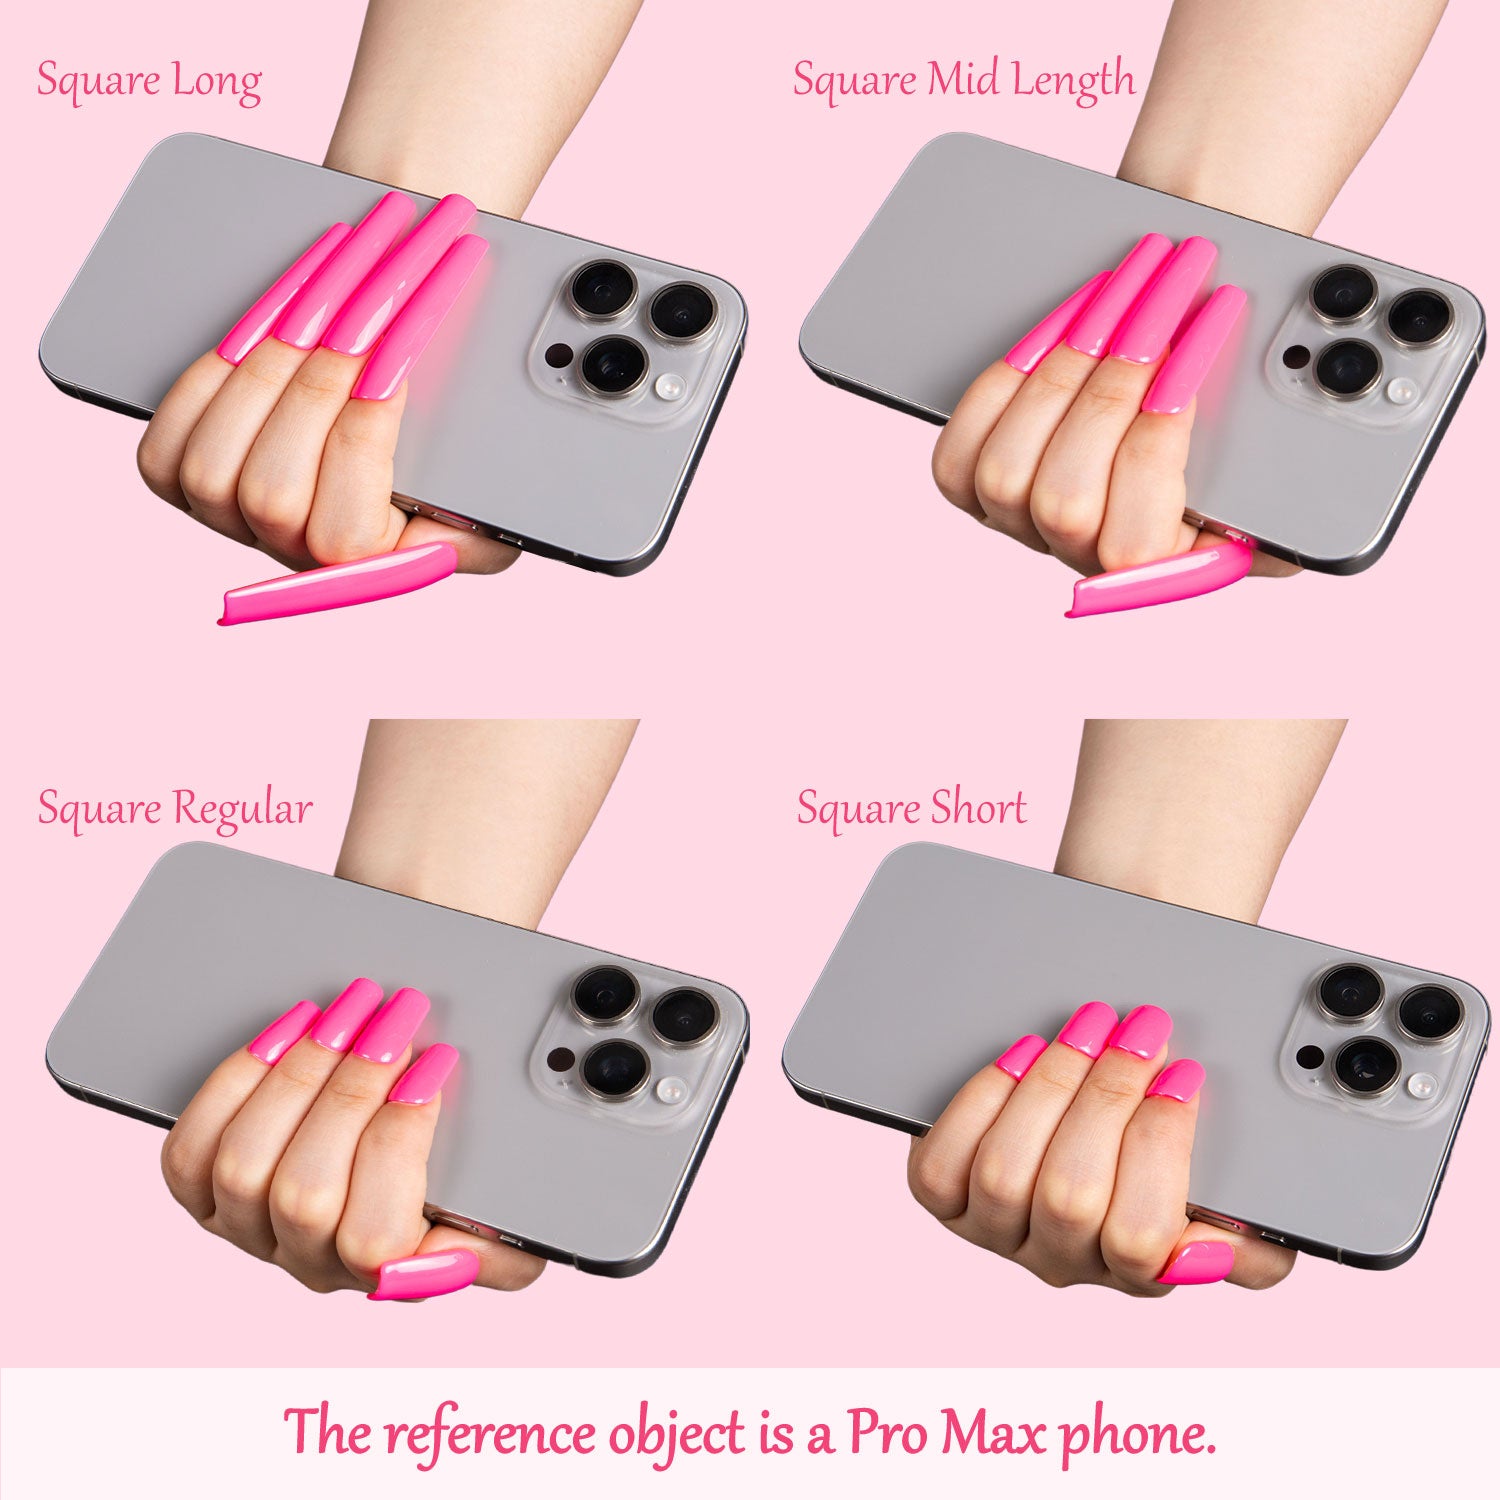 Comparison of four square-shaped press-on nail lengths in pink, held by hands gripping Pro Max phones, labeled as Square Long, Square Mid Length, Square Regular, and Square Short.